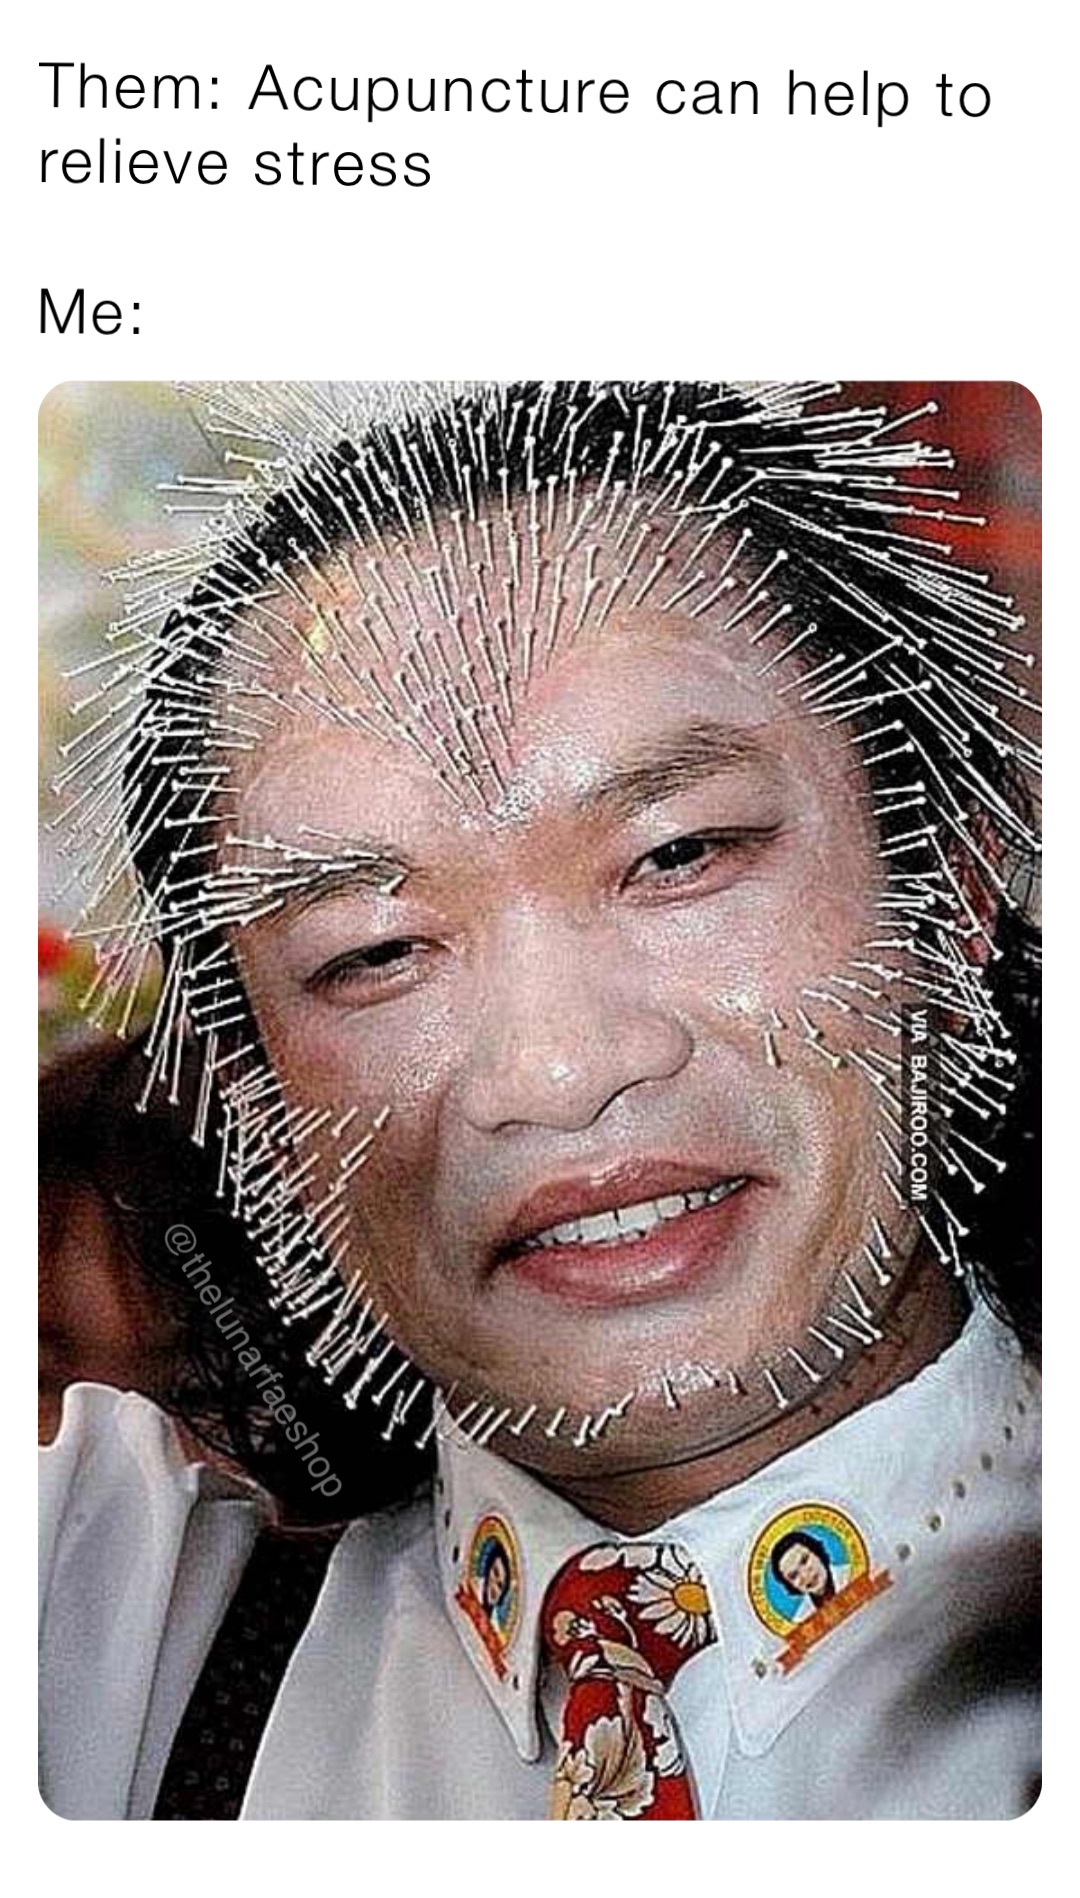 Them: Acupuncture can help to relieve stress

Me: